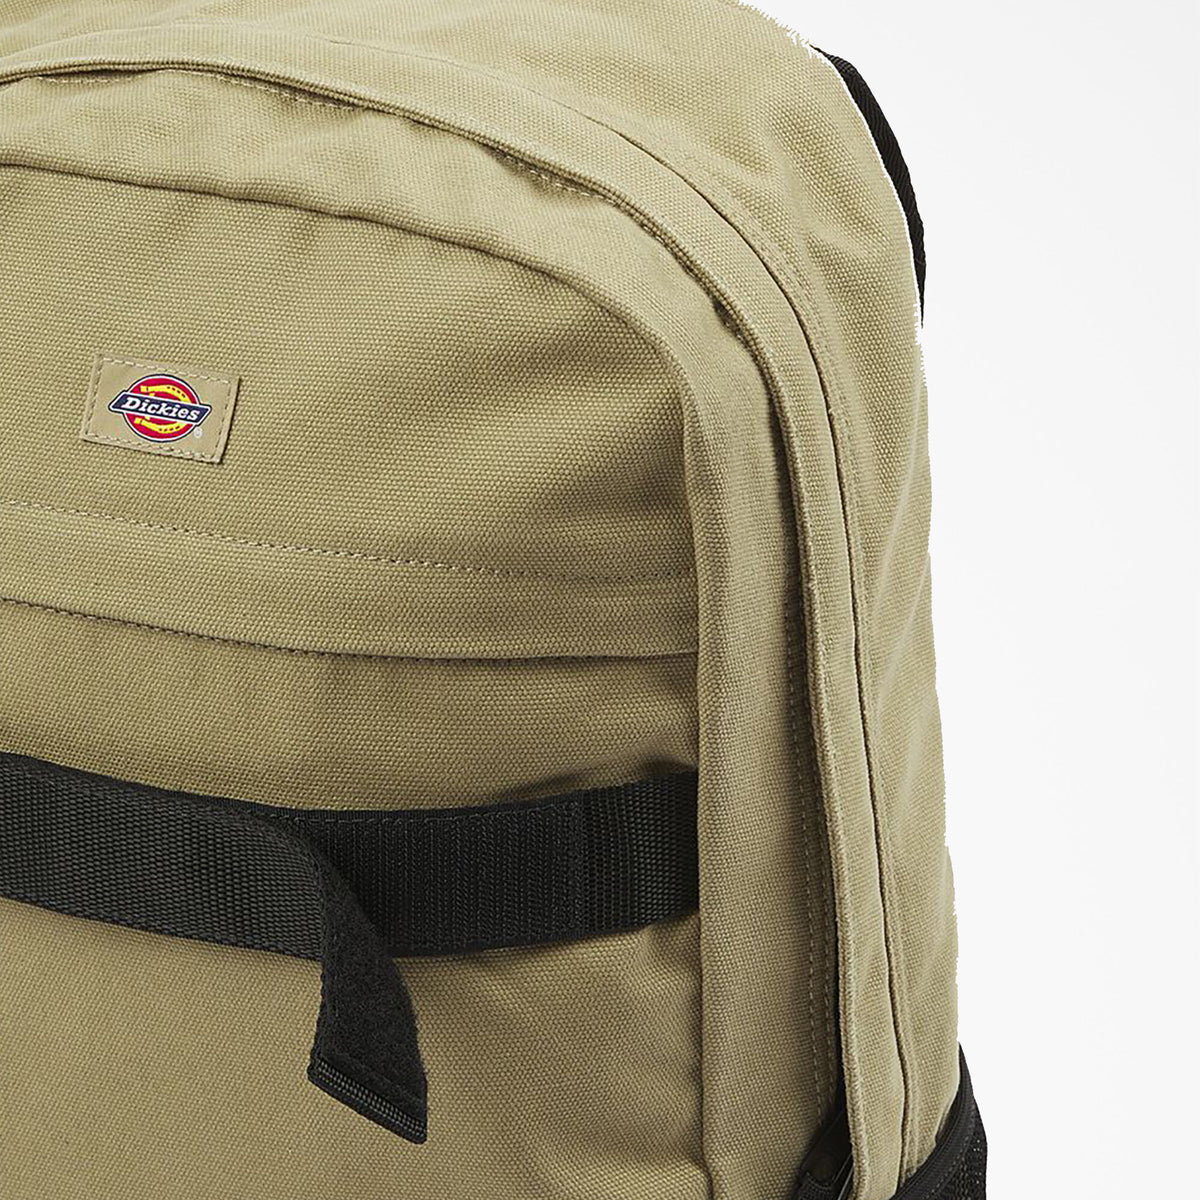 Duck Canvas Backpack